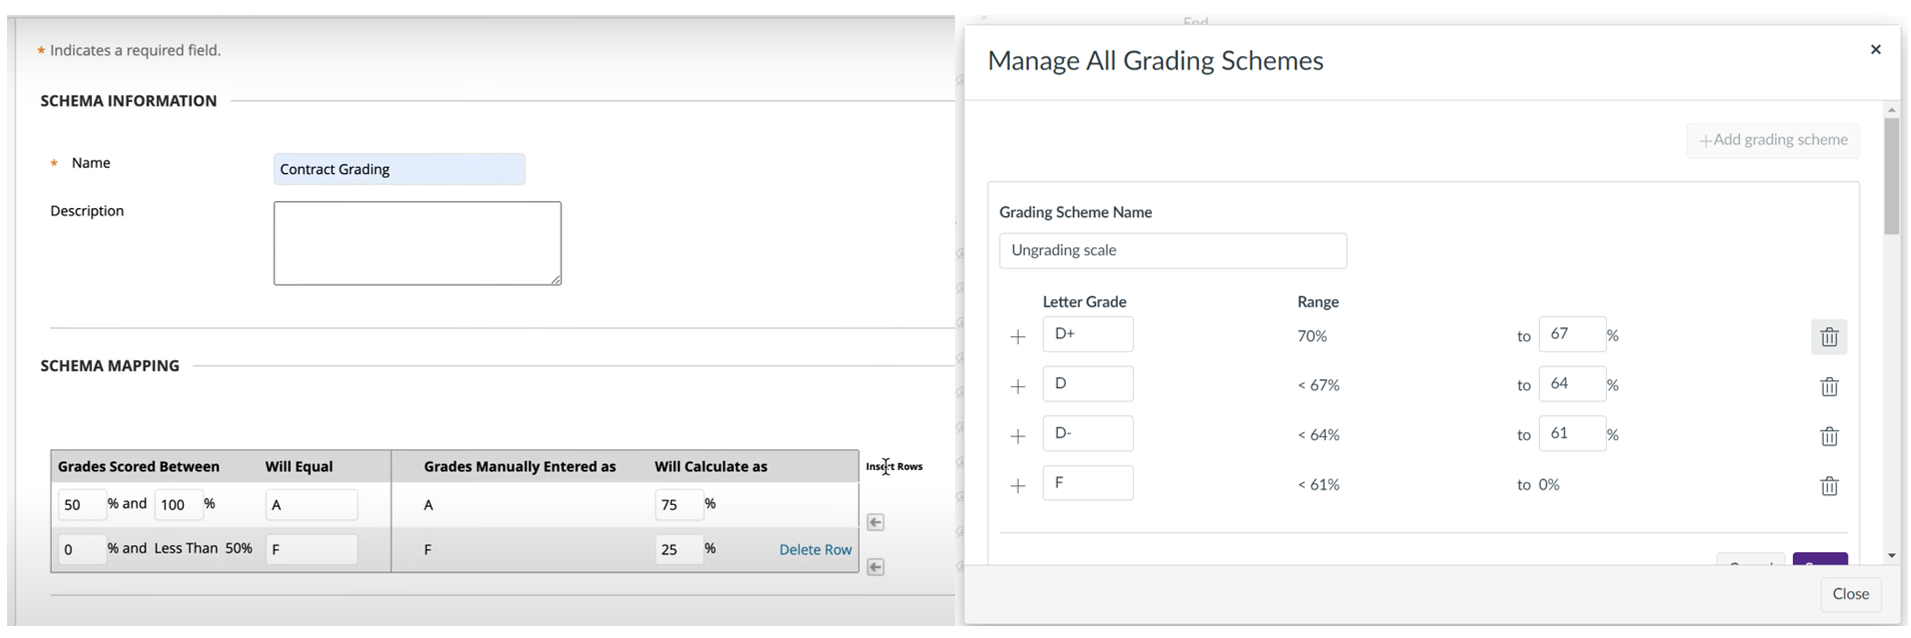 Picture 3 - Selecting the number of minimal grading options in Blackboard (left) and Canvas (right) - Blackboard, under schema information, the name of the schema is contract grading. grades scored between 50 and 100 will equal A. 0% to 50% will be F; for Canvas under manage all grading schemas, grading scheme name is ungrading scale